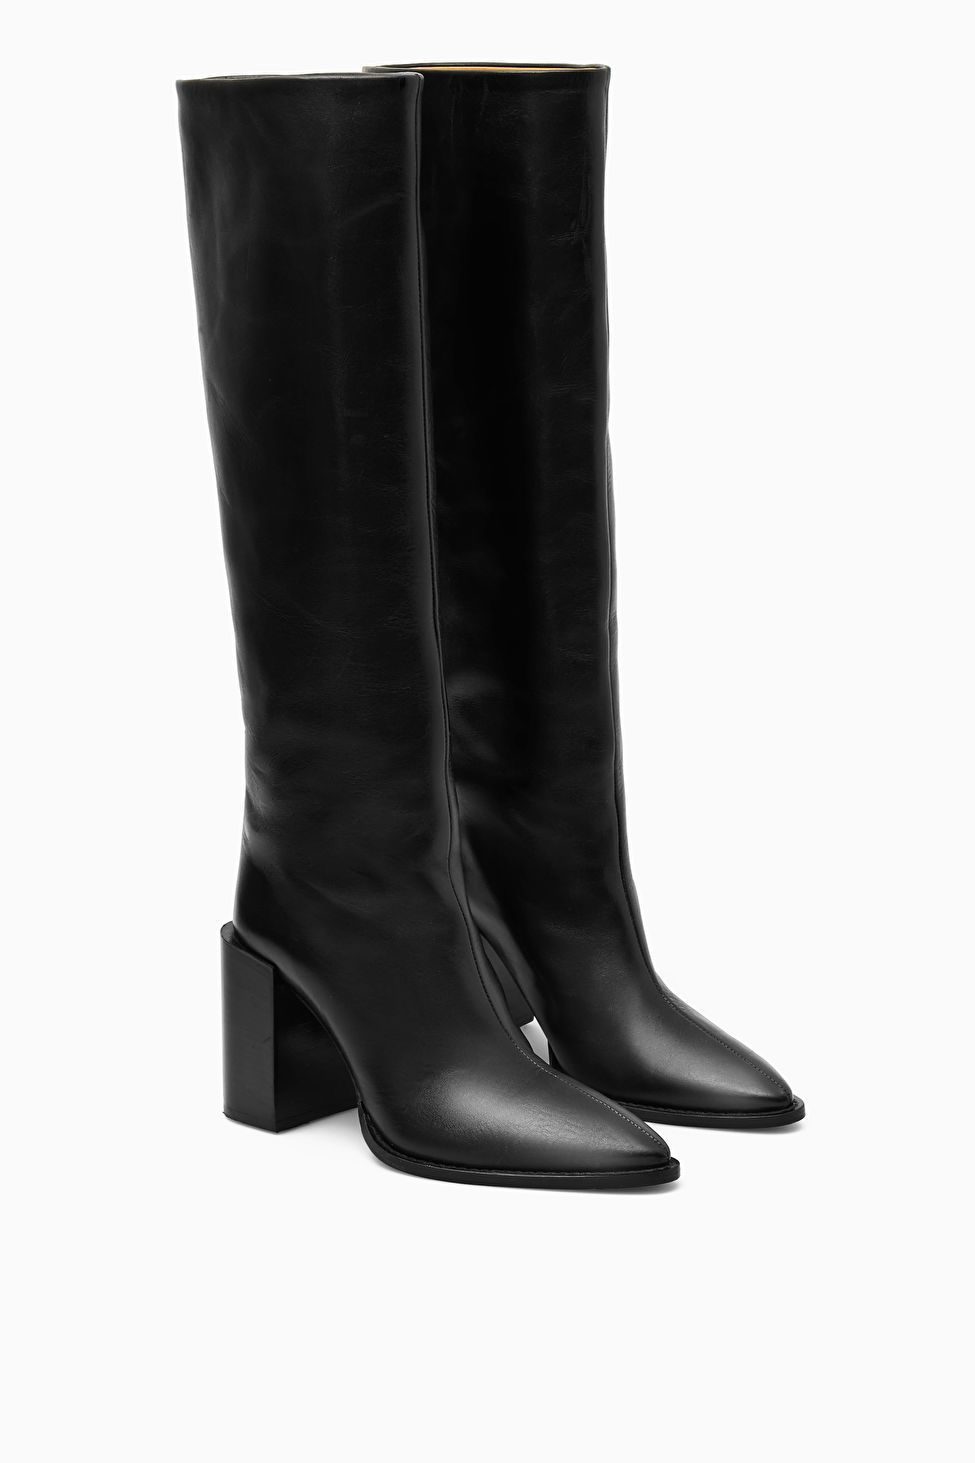 KNEE-HIGH POINTED LEATHER BOOTS | COS UK